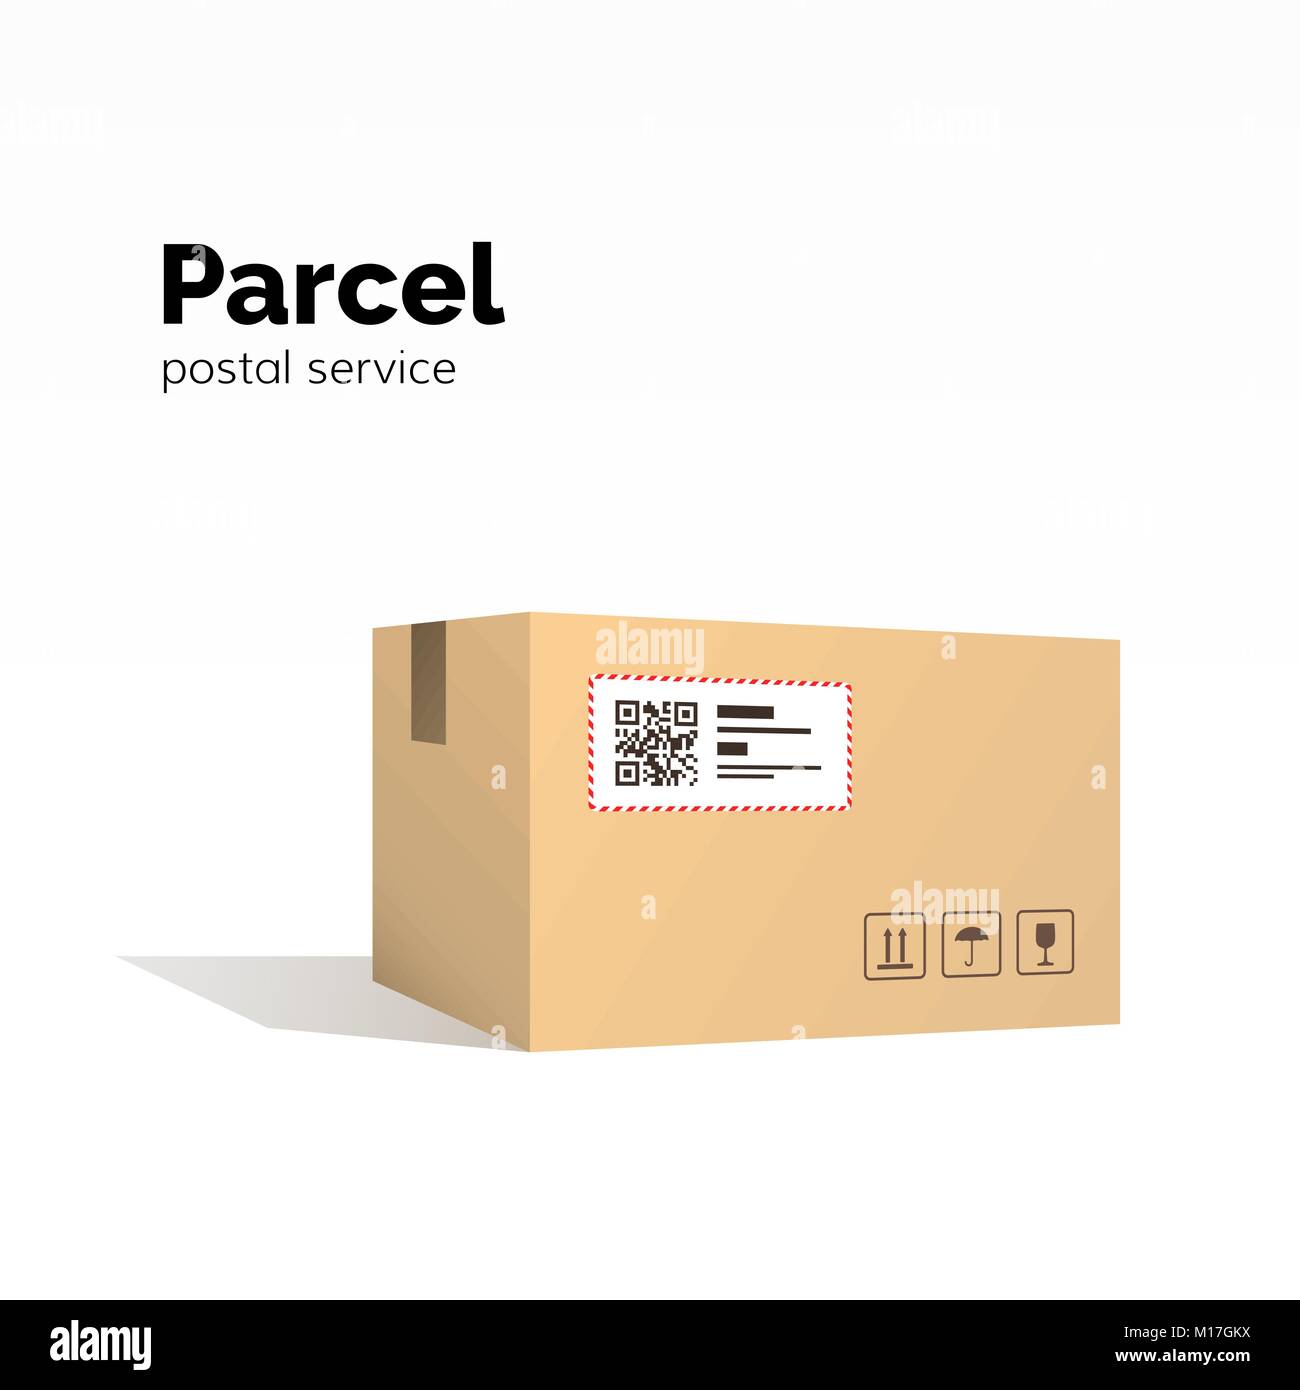 Transportation parcel. carton box container. QR code, closed parcel box, package paper box. package service, flat vector illustration isolated on whit Stock Vector